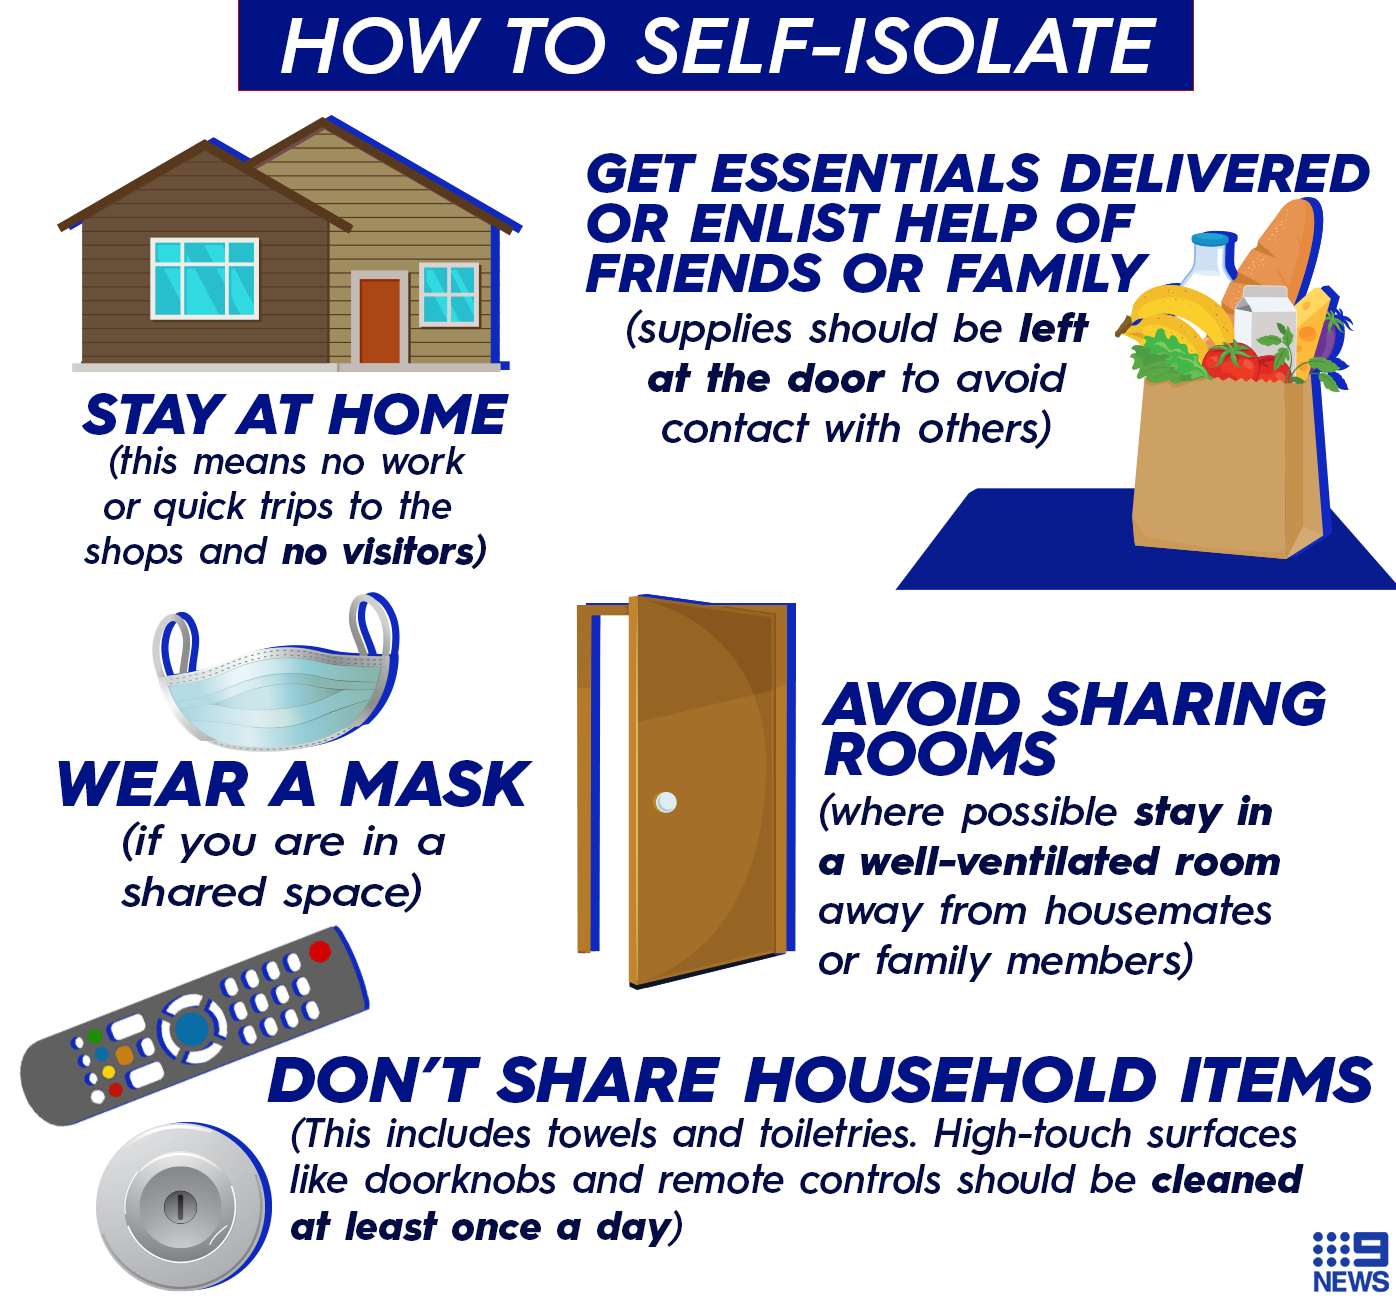 Tips for self-isolation as the coronavirus spreads.